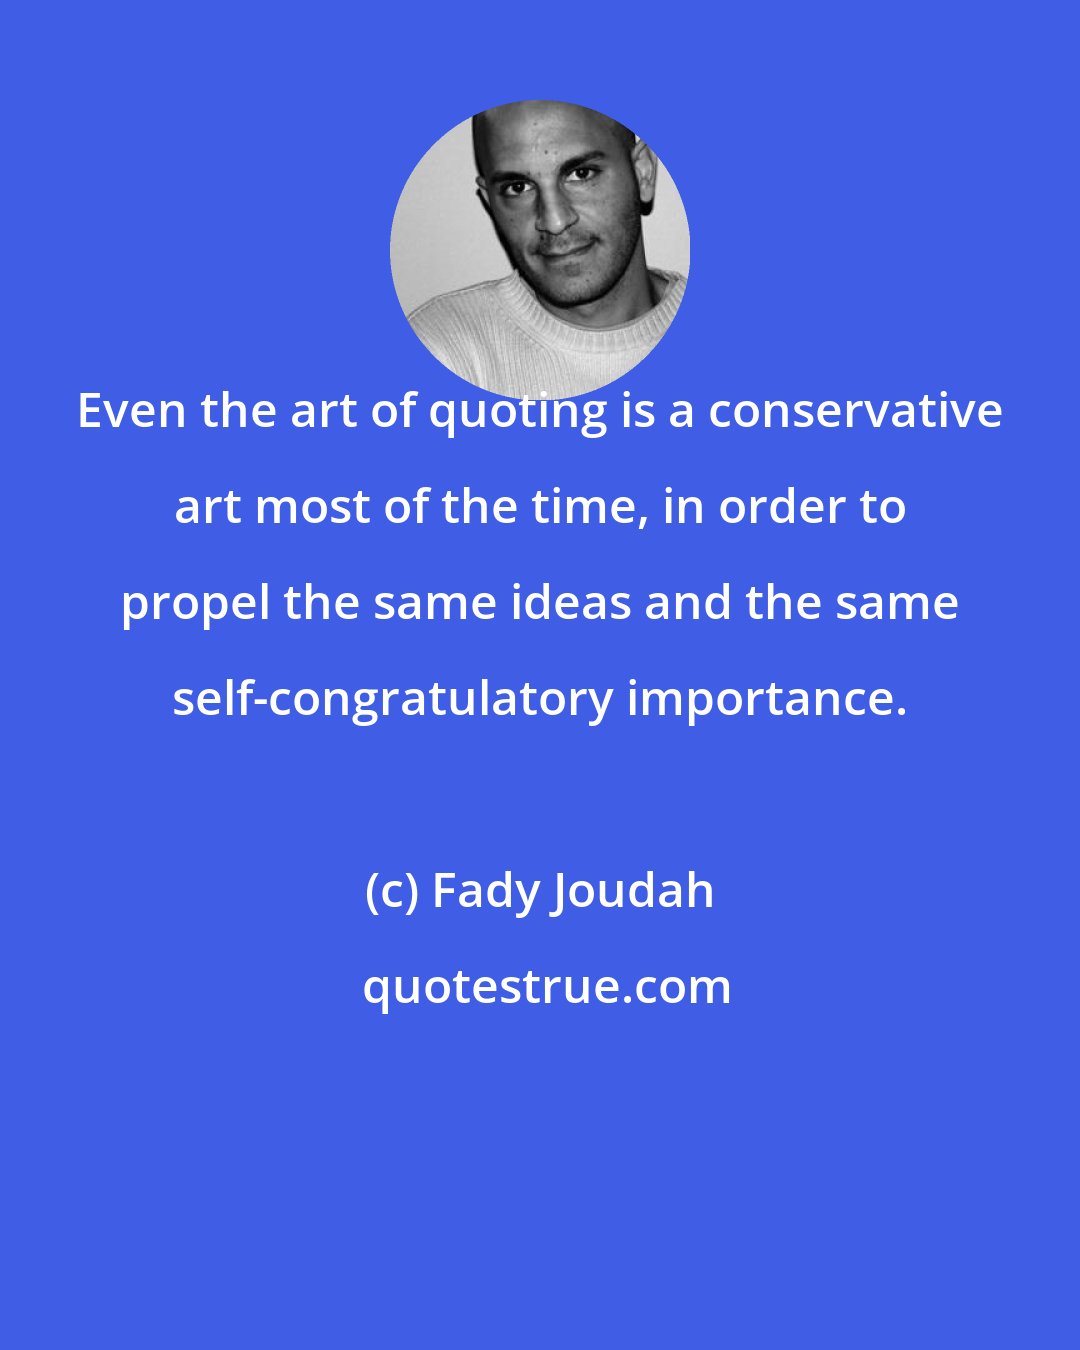 Fady Joudah: Even the art of quoting is a conservative art most of the time, in order to propel the same ideas and the same self-congratulatory importance.